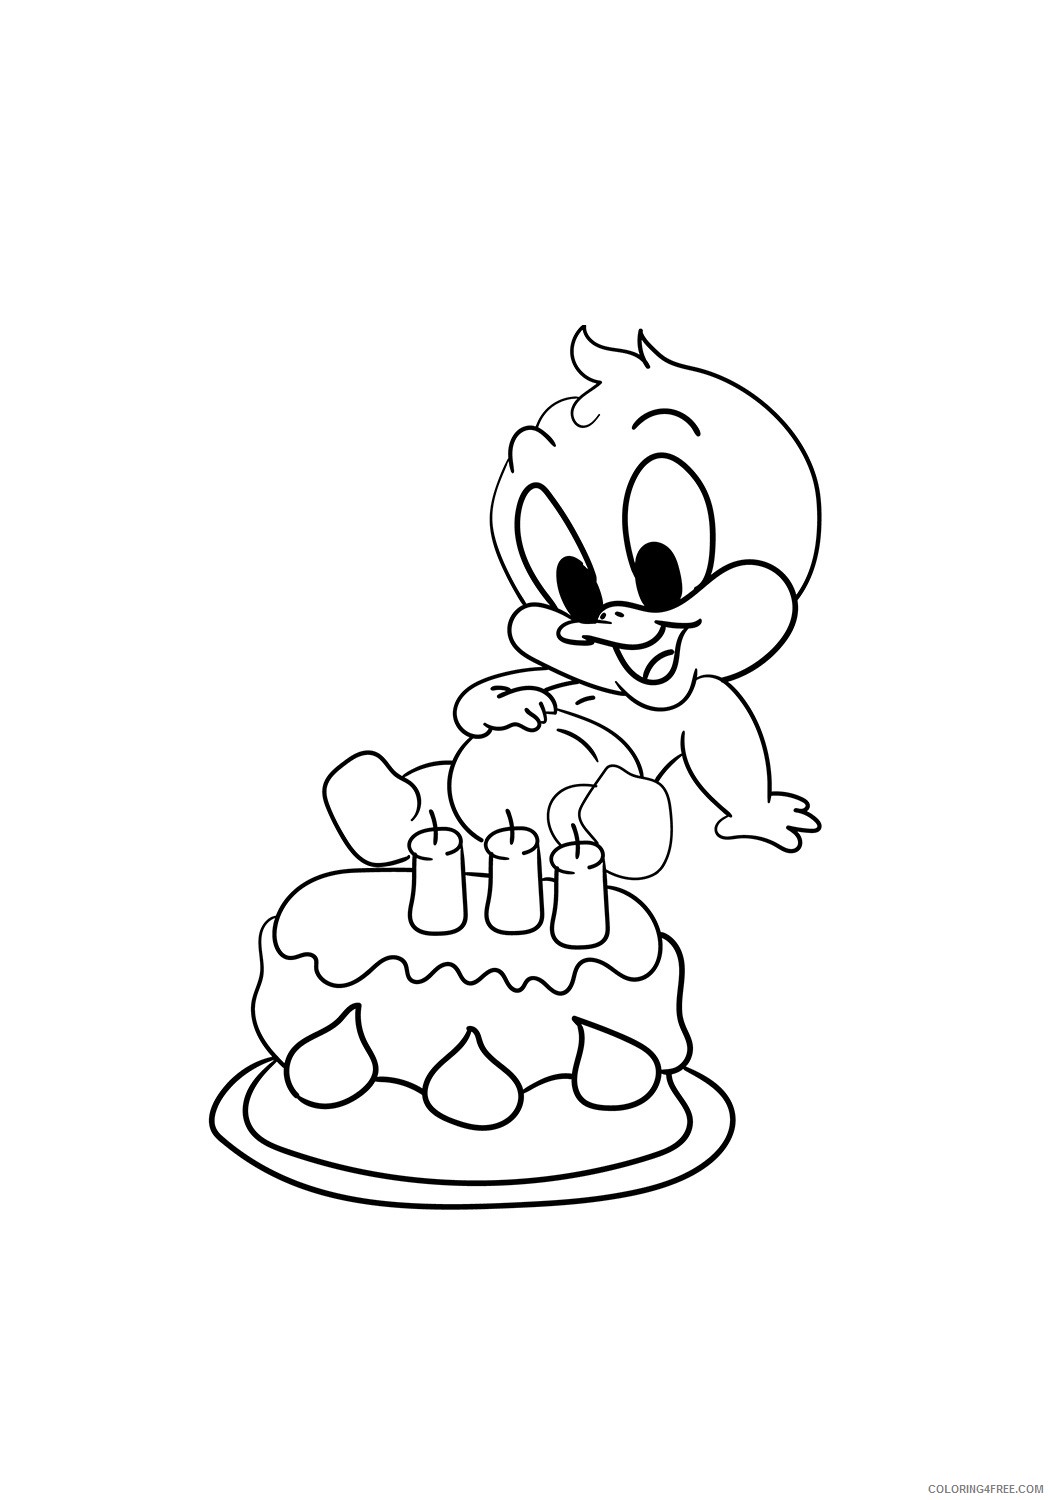 Daffy Duck Coloring Pages Cartoons 1526718958_baby daffy 17 a4 Printable 2020 1967 Coloring4free